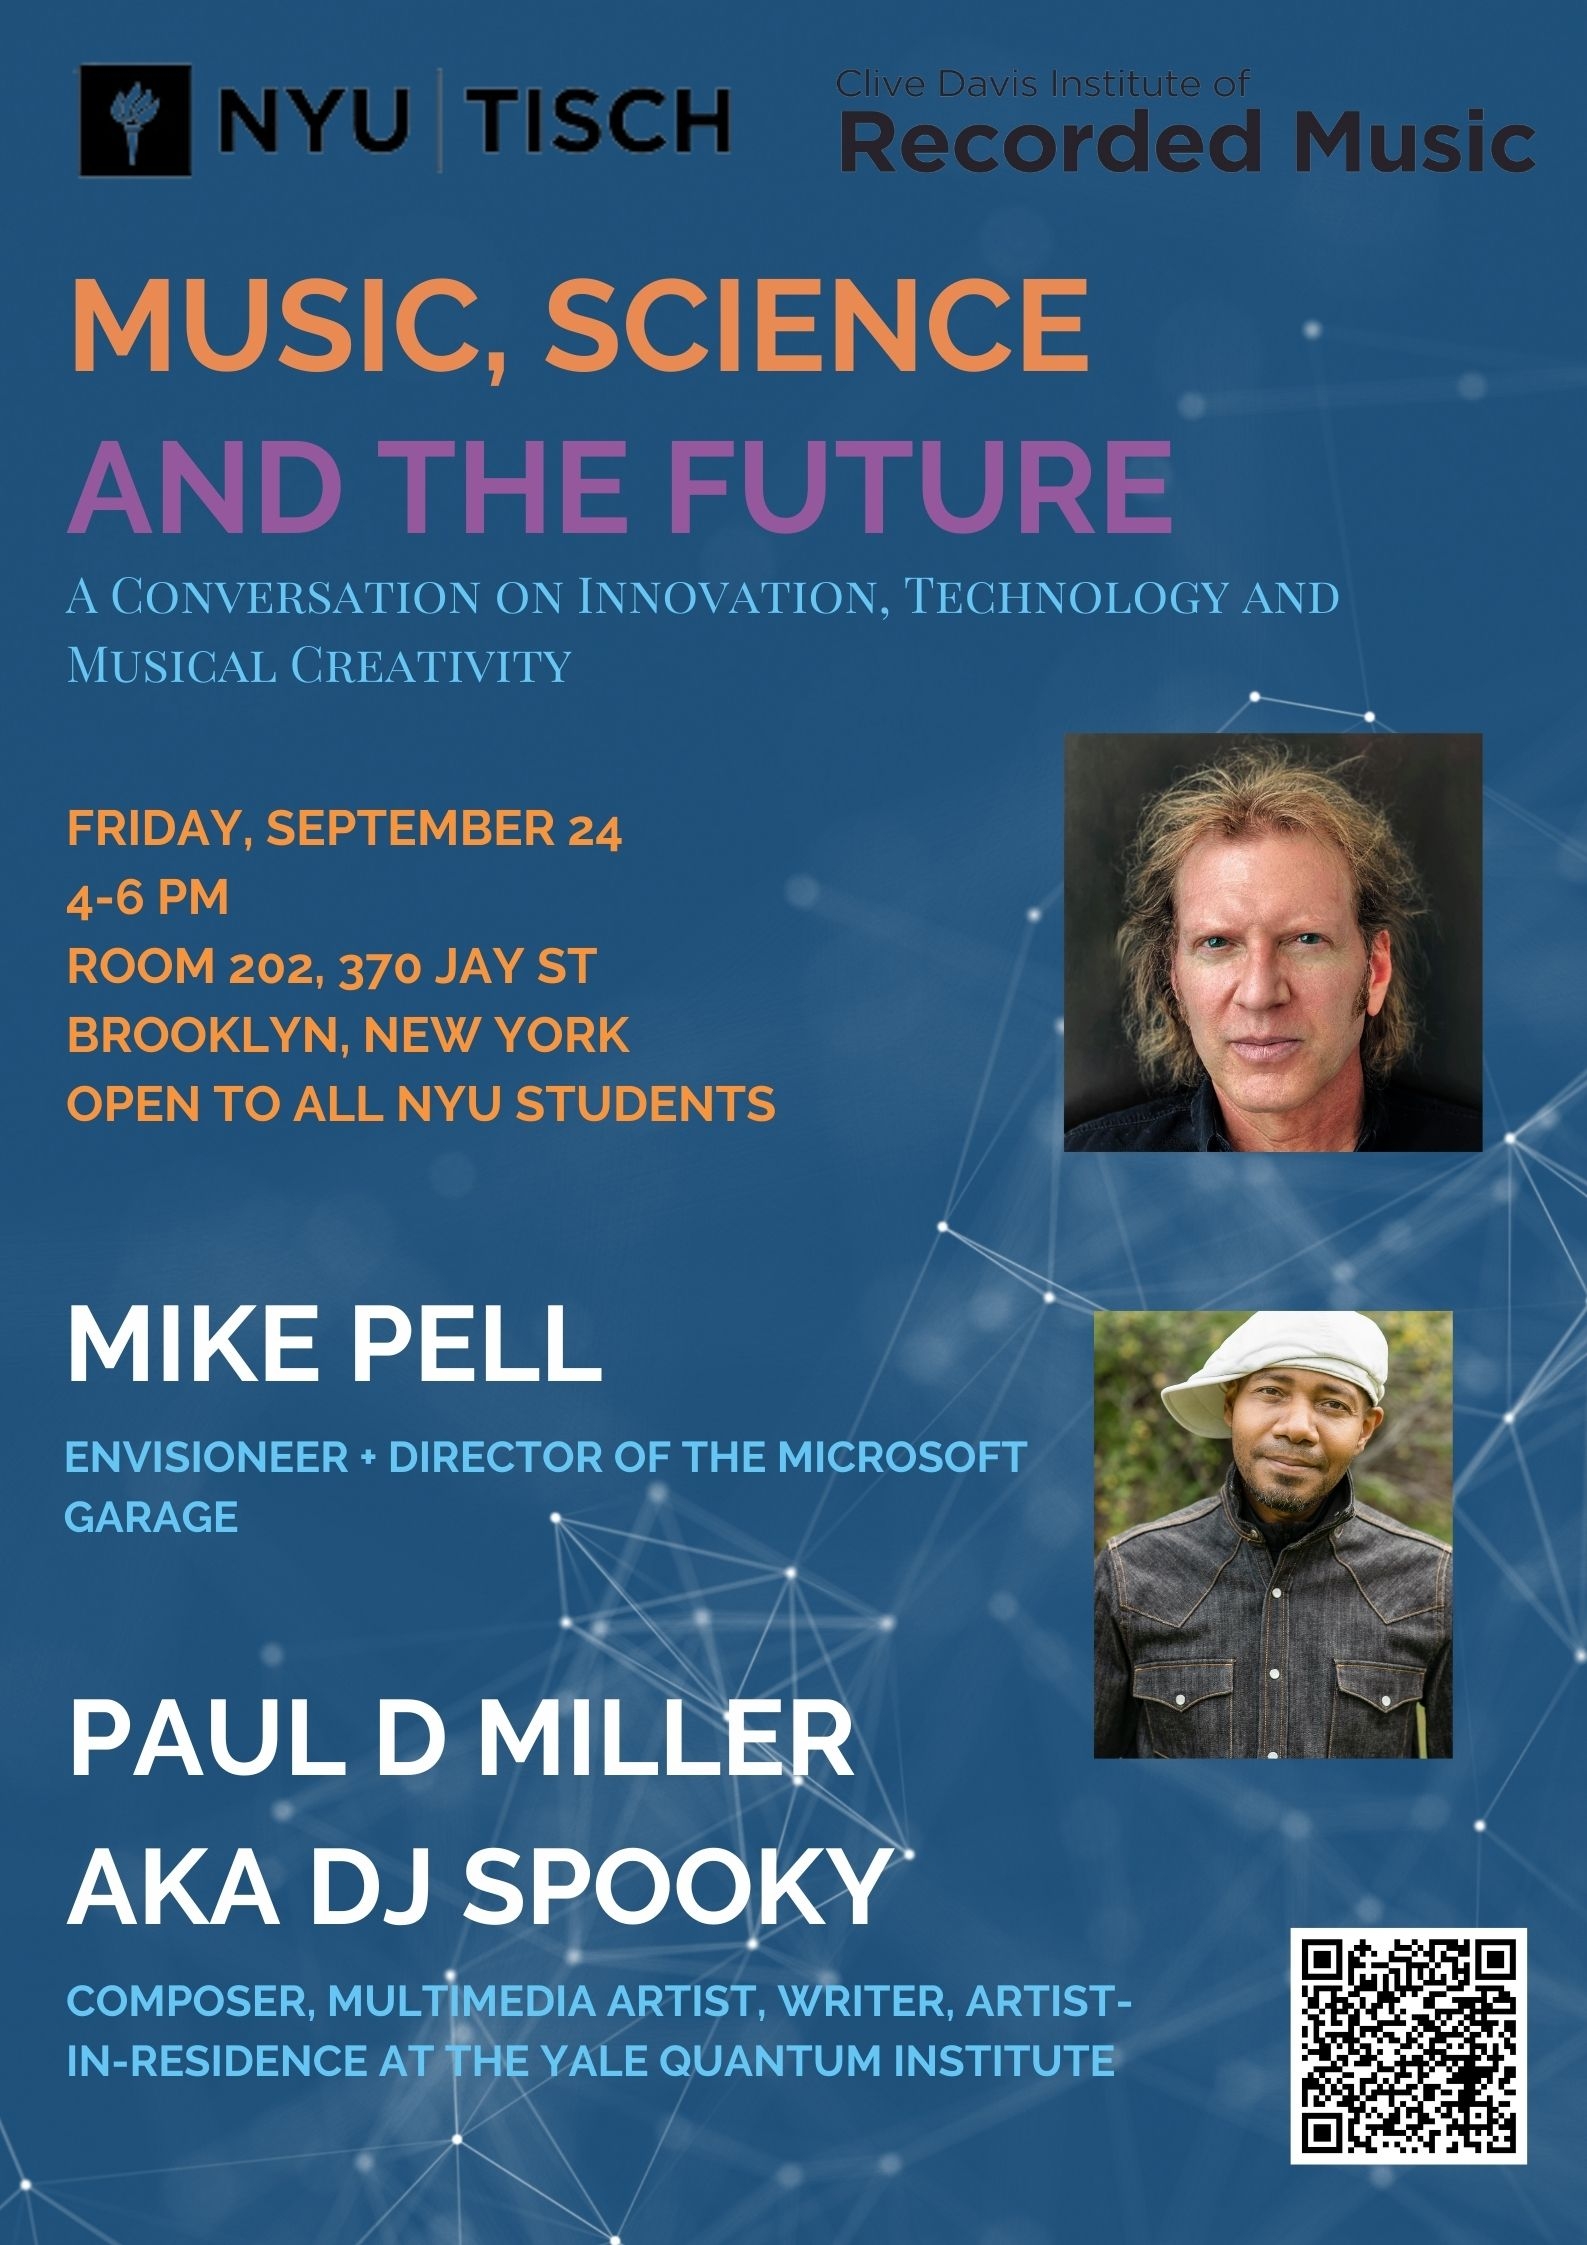 MUSIC, SCIENCE AND THE FUTURE: A CONVERSATION ON INNOVATION, TECHNOLOGY AND MUSICAL CREATIVITY